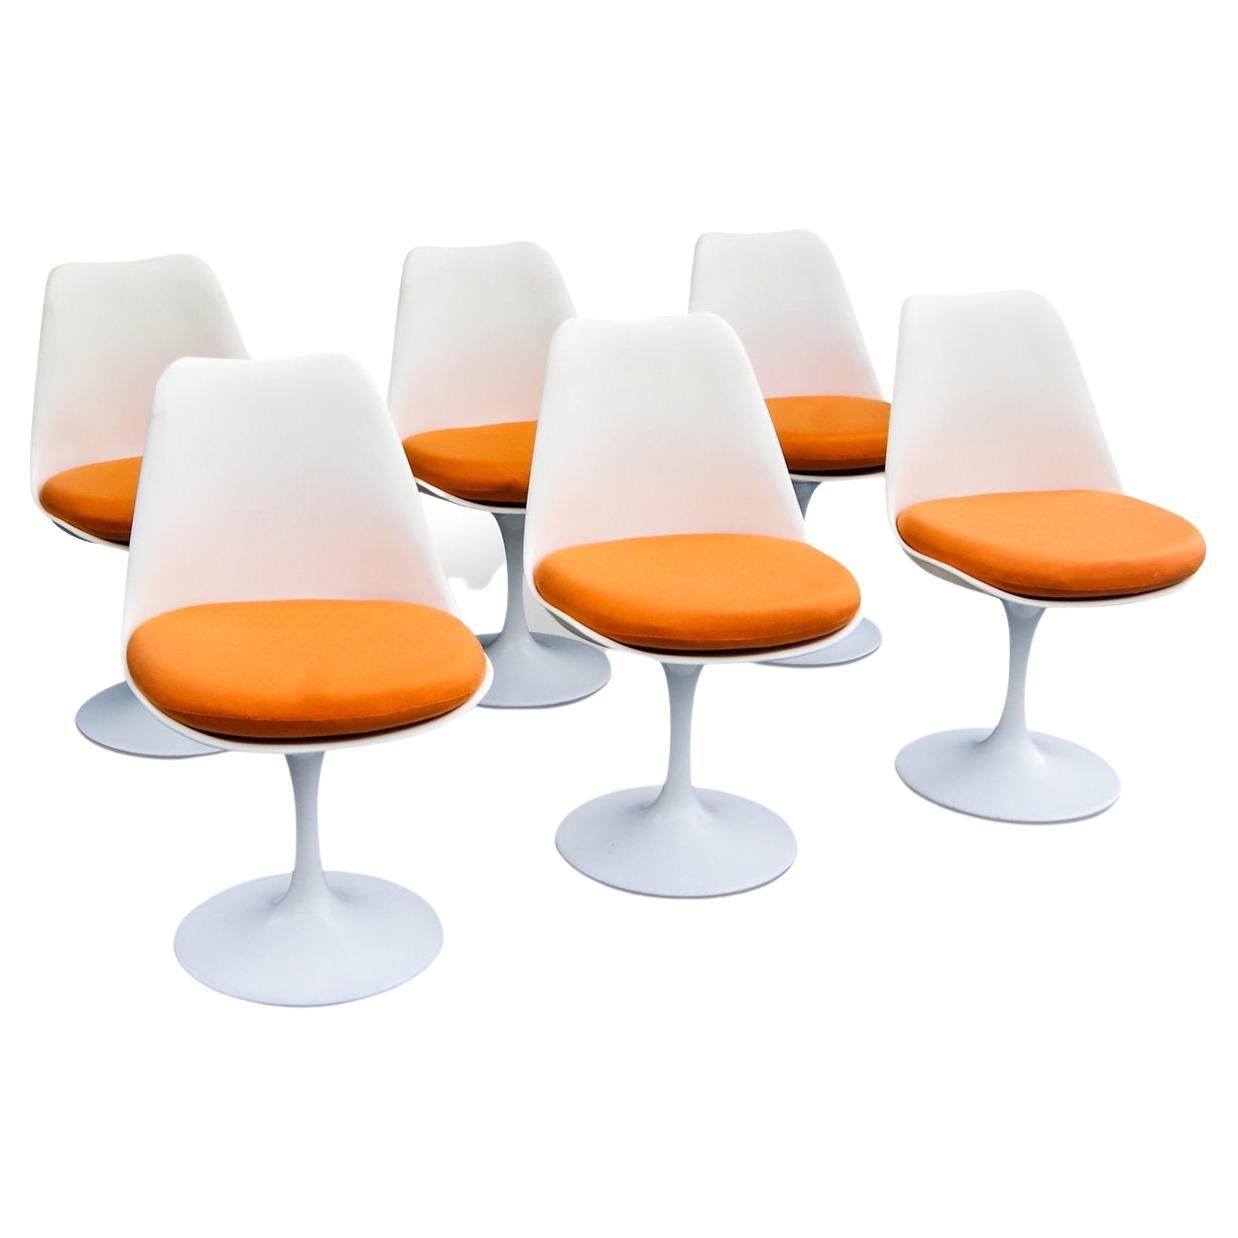 1960s set of 6 Eero Saarinen fibreglass Tulip Swivel dining chairs. 
Licensed and manufactured by Rudi Bonzanini.
Tulip shaped swivel action fibreglass shells, bolted onto powder coated steel weighted bases. 
The chairs come with 6 cushions in